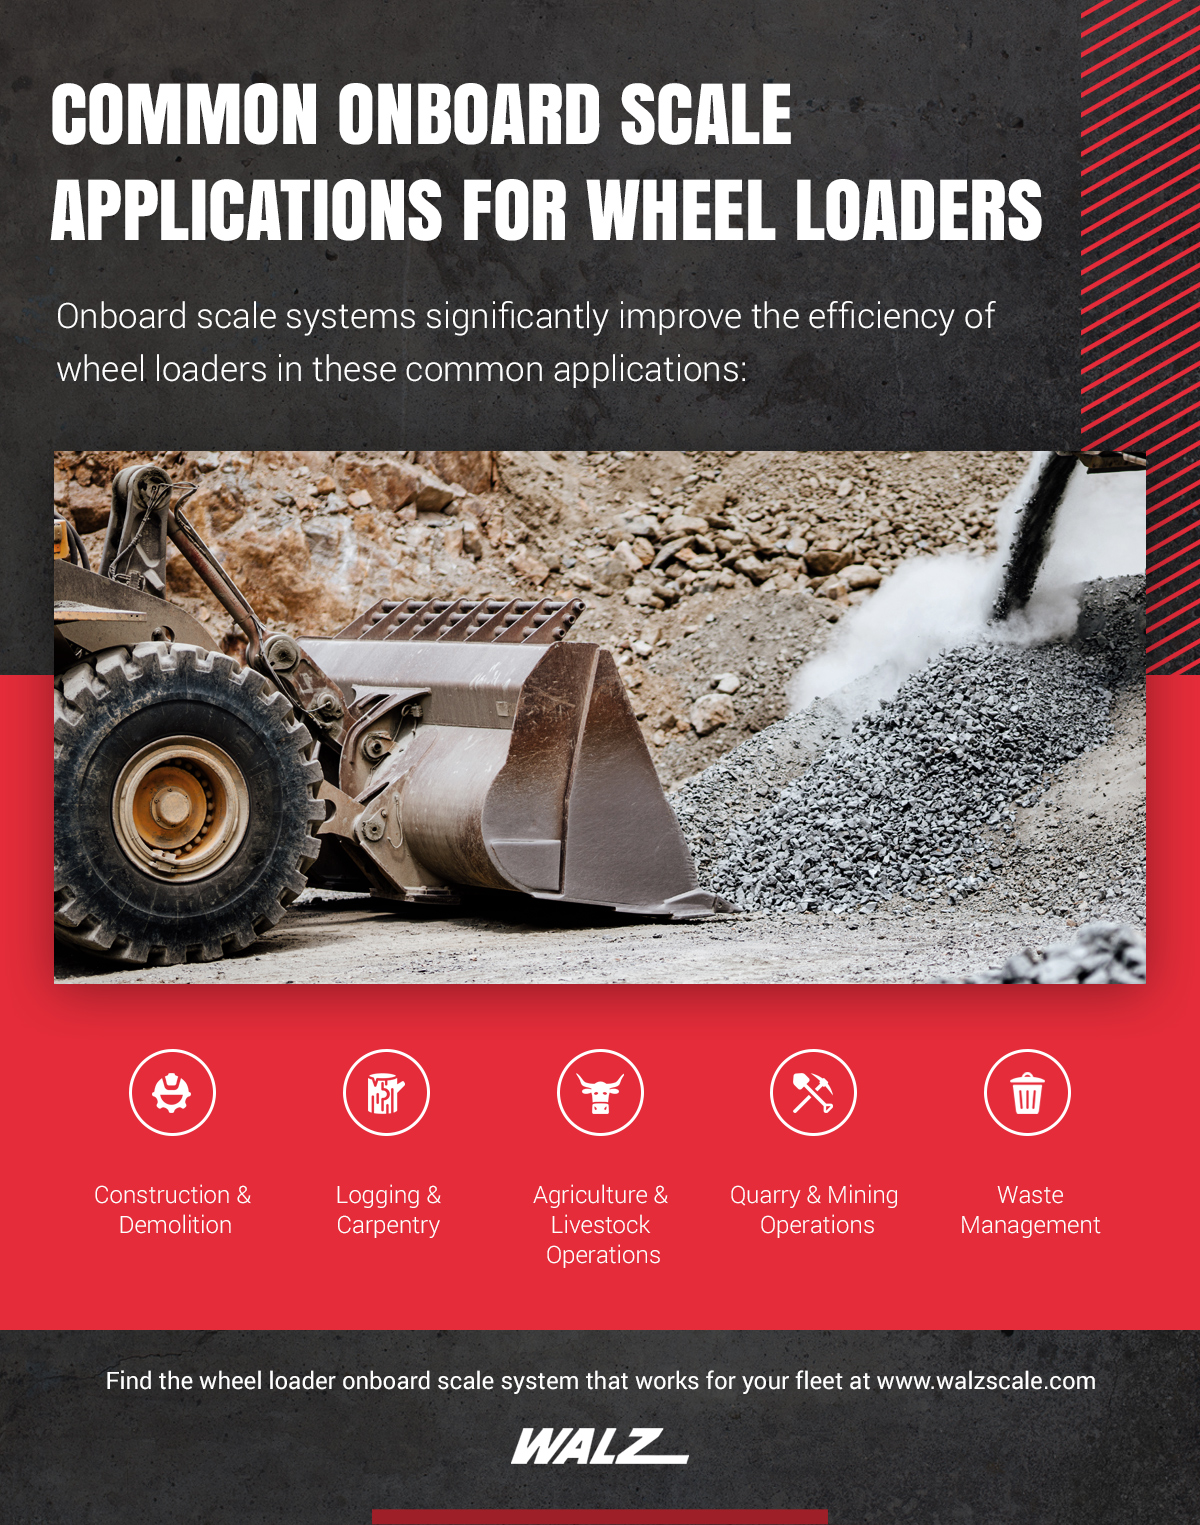 https://walzscale.com/wp-content/uploads/2021/04/Common-Onboard-Scale-Applications-for-Wheel-Loaders-infographic.jpg